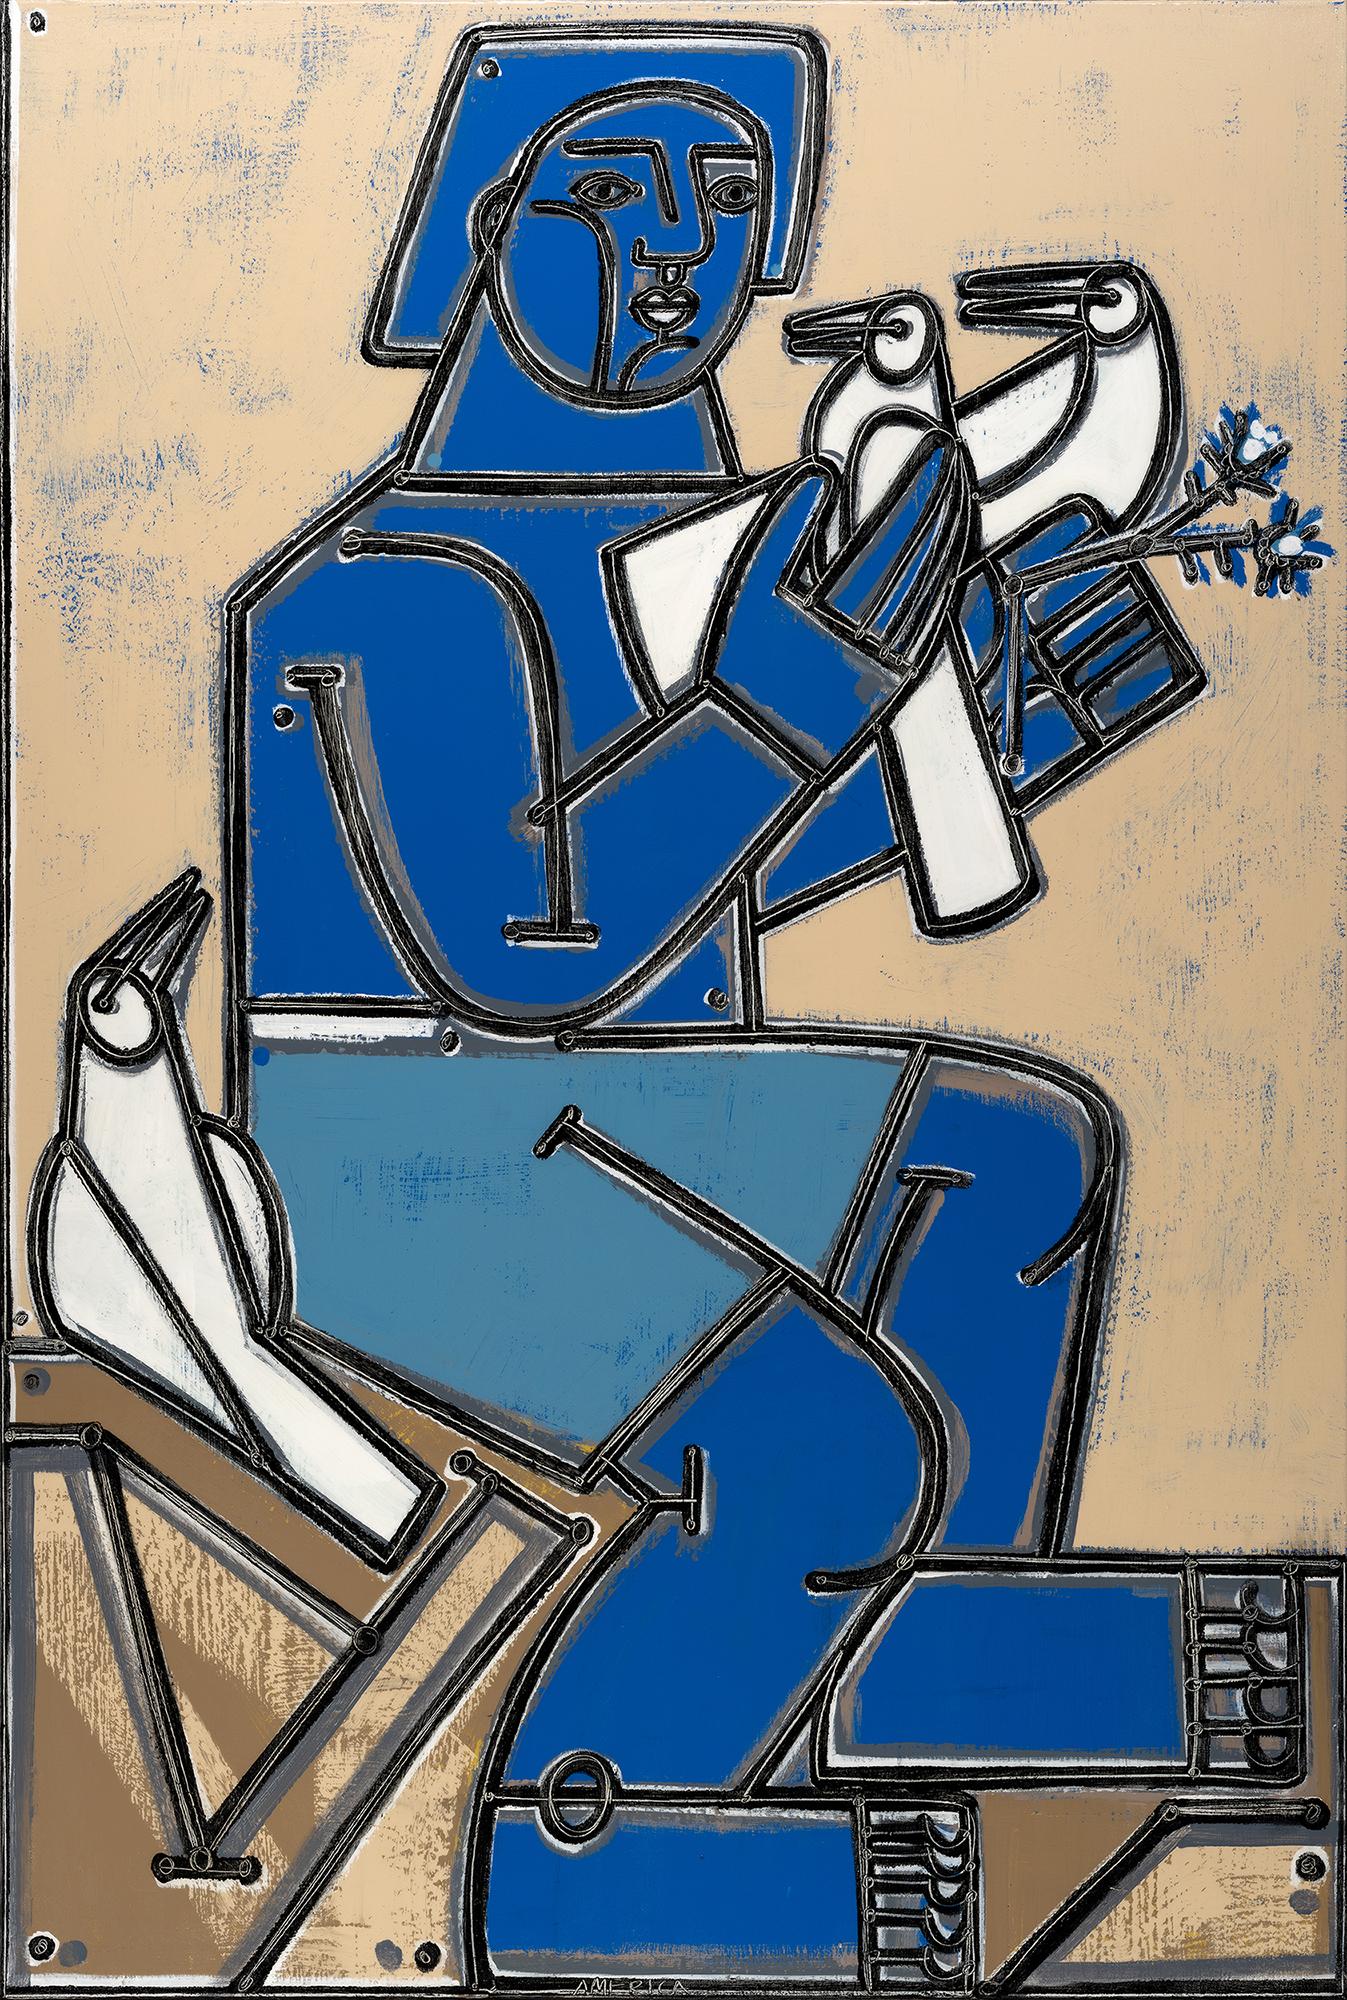 America Martin
"Boy with Doves in Blue"
Oil & Acrylic on Canvas
62" x 42" Framed

Exploring the identity of both her namesake and country, LA-based America Martin draws inspiration from her Colombian heritage and the human figure to represent a